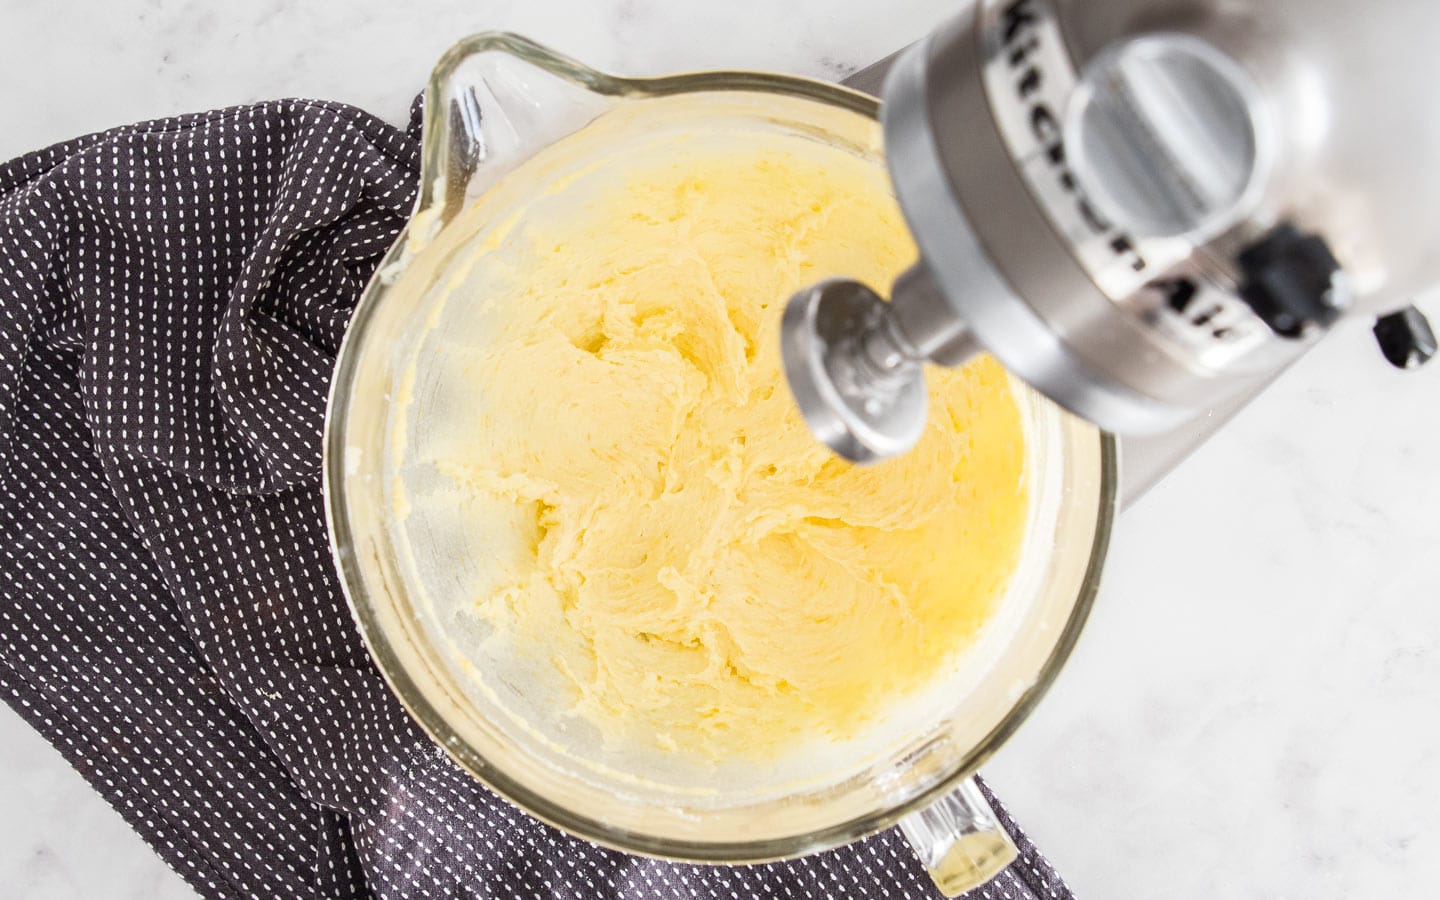 The butter and sugar creamed together in a stand mixer bowl.